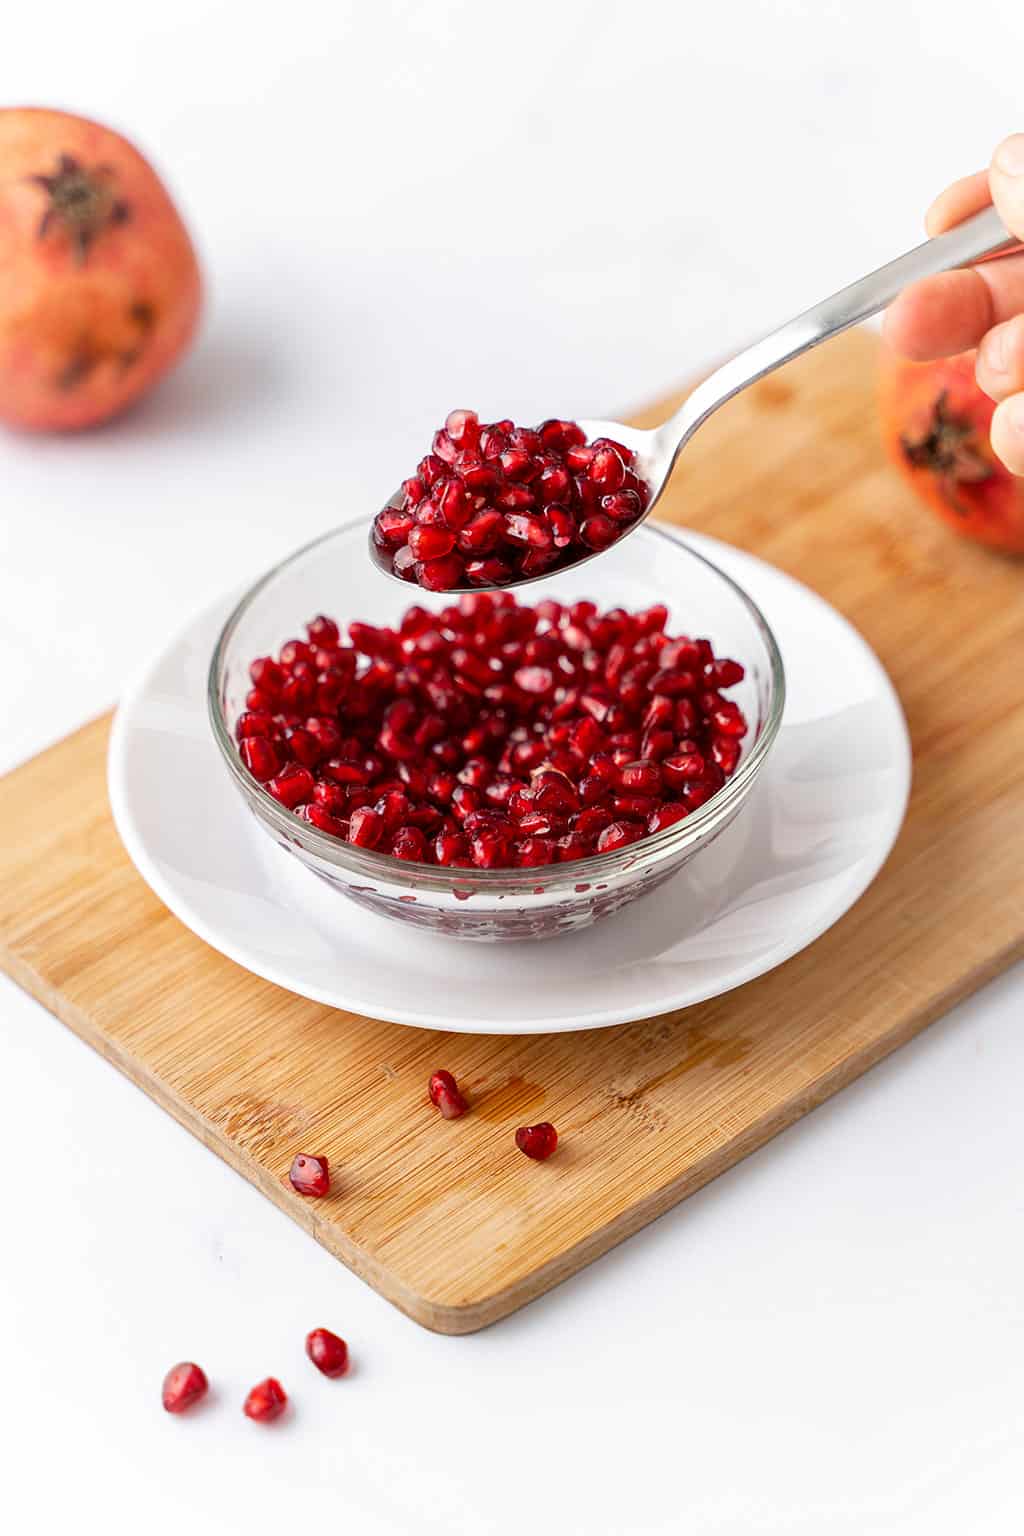 one bowl filled with fresh pomegranate arils in a spoon 